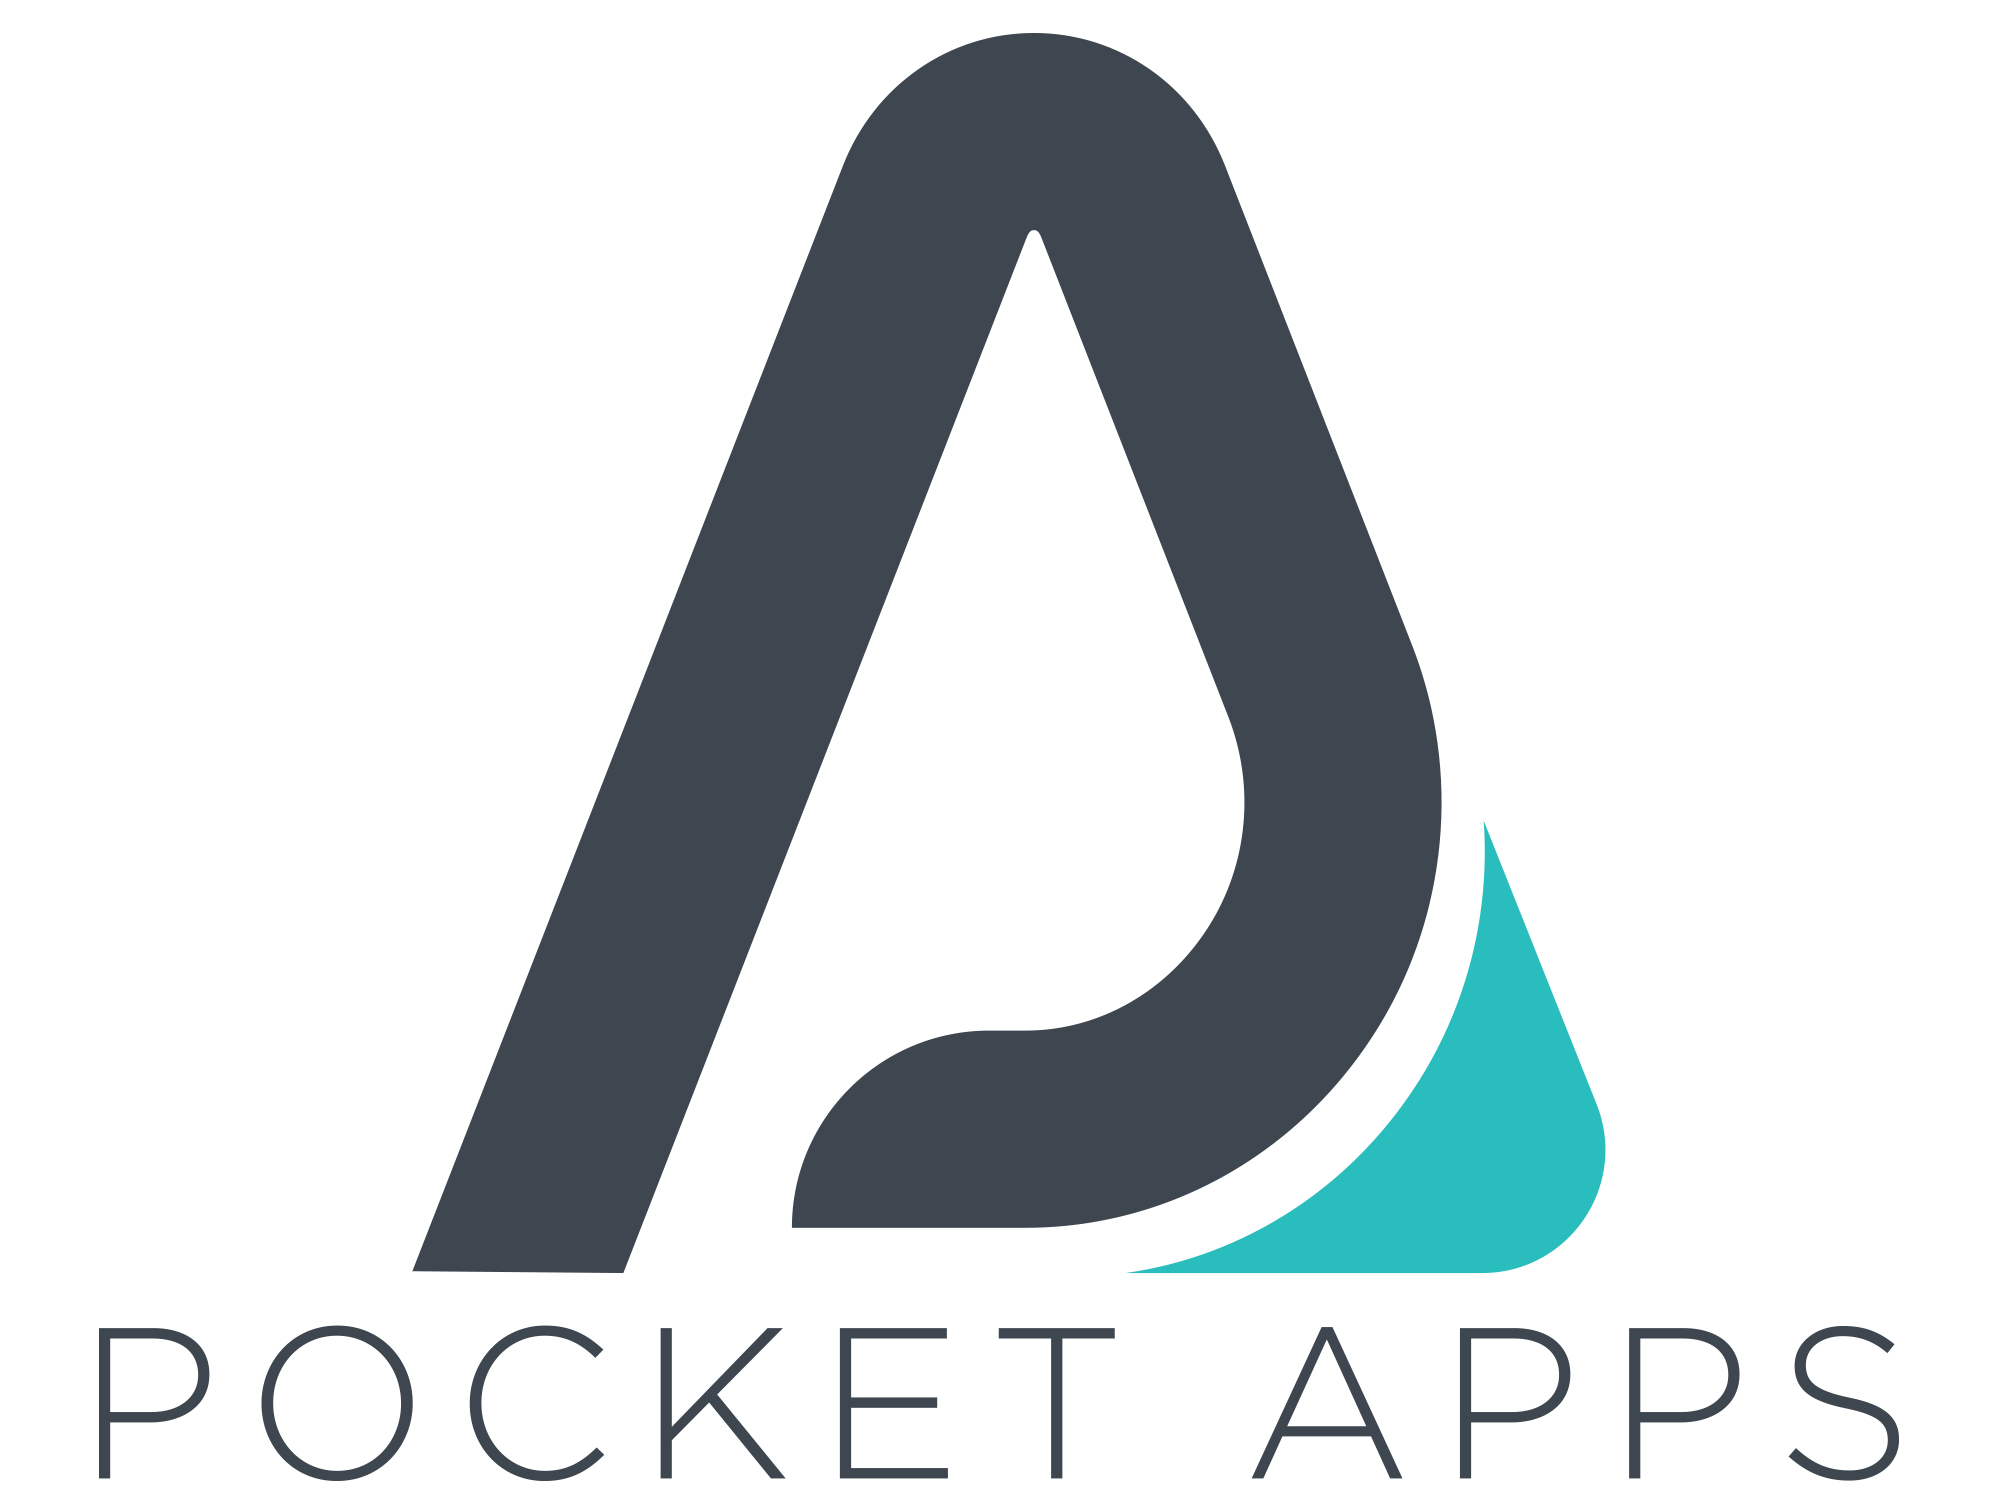 Pocket Apps profile on Qualified.One